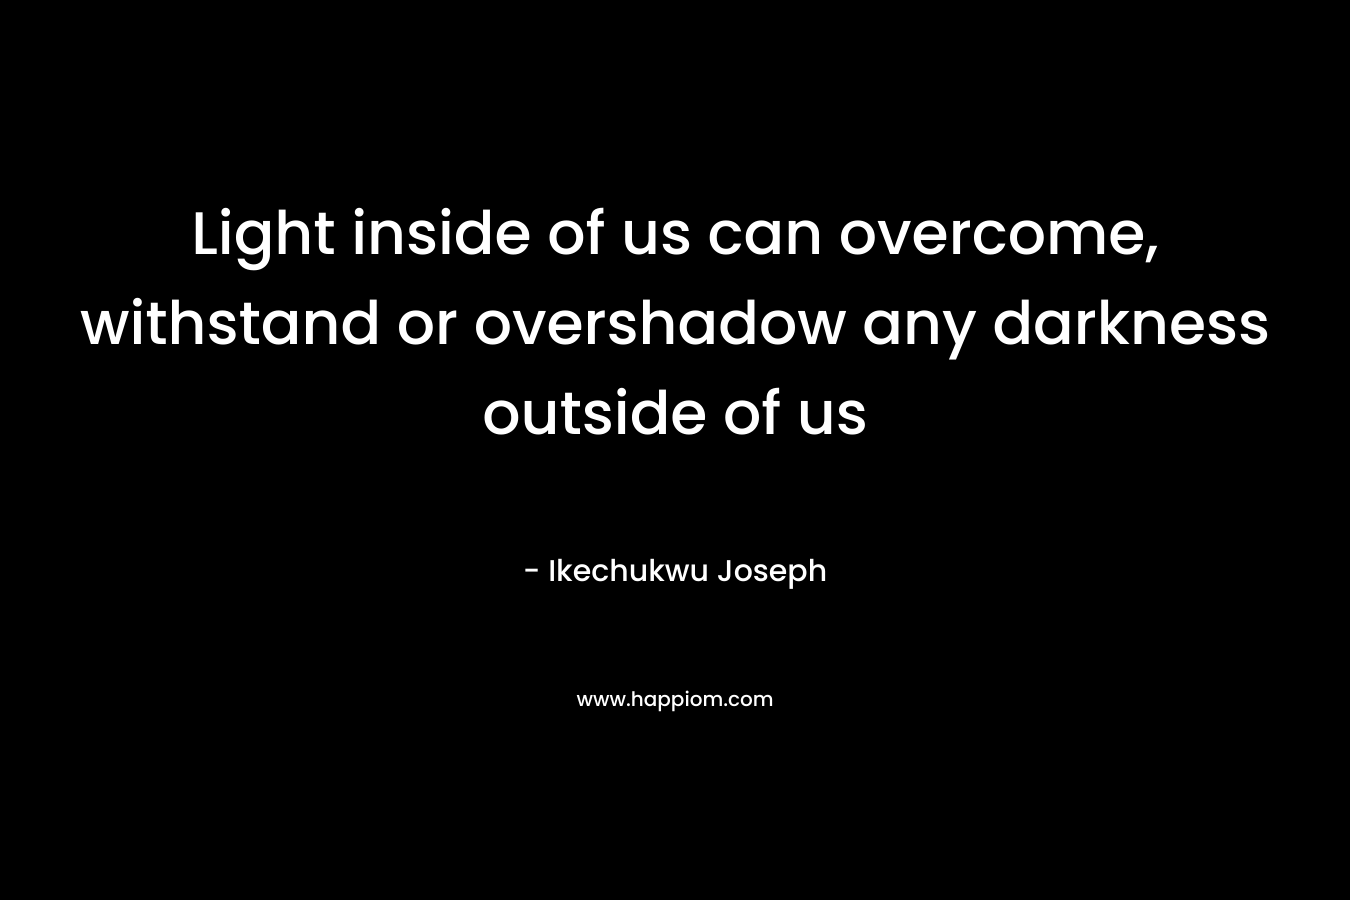 Light inside of us can overcome, withstand or overshadow any darkness outside of us